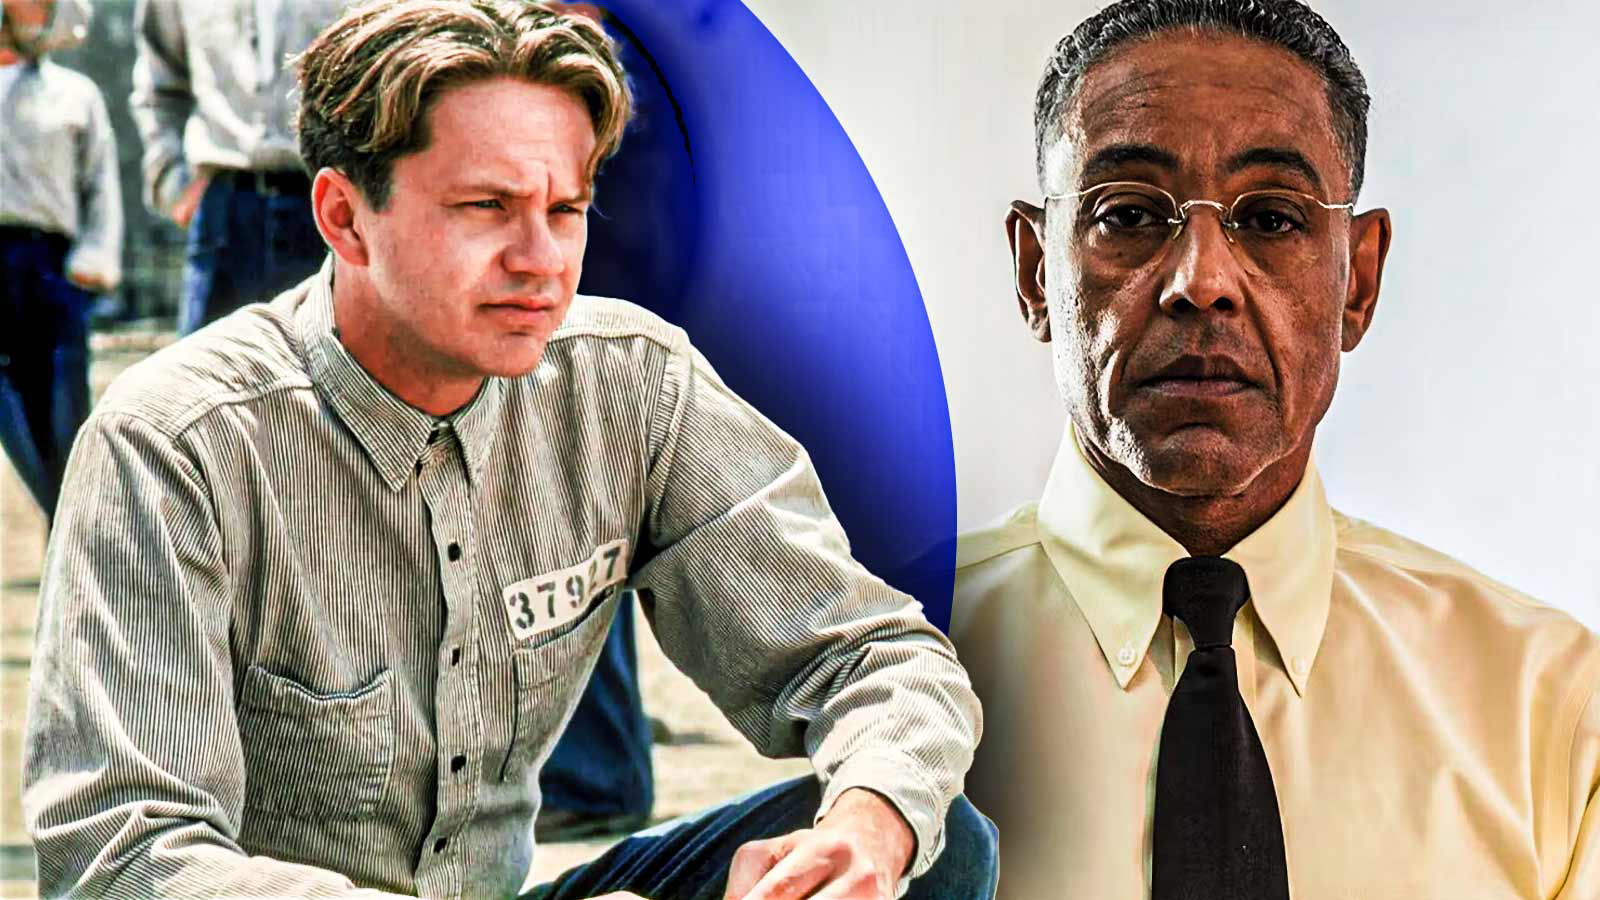 “Truly in a deranged mindset”: Tim Robbins Erupts after Fans Draw Comparison Between His 1992 Film With Giancarlo Esposito to a Real-Life Political Controversy